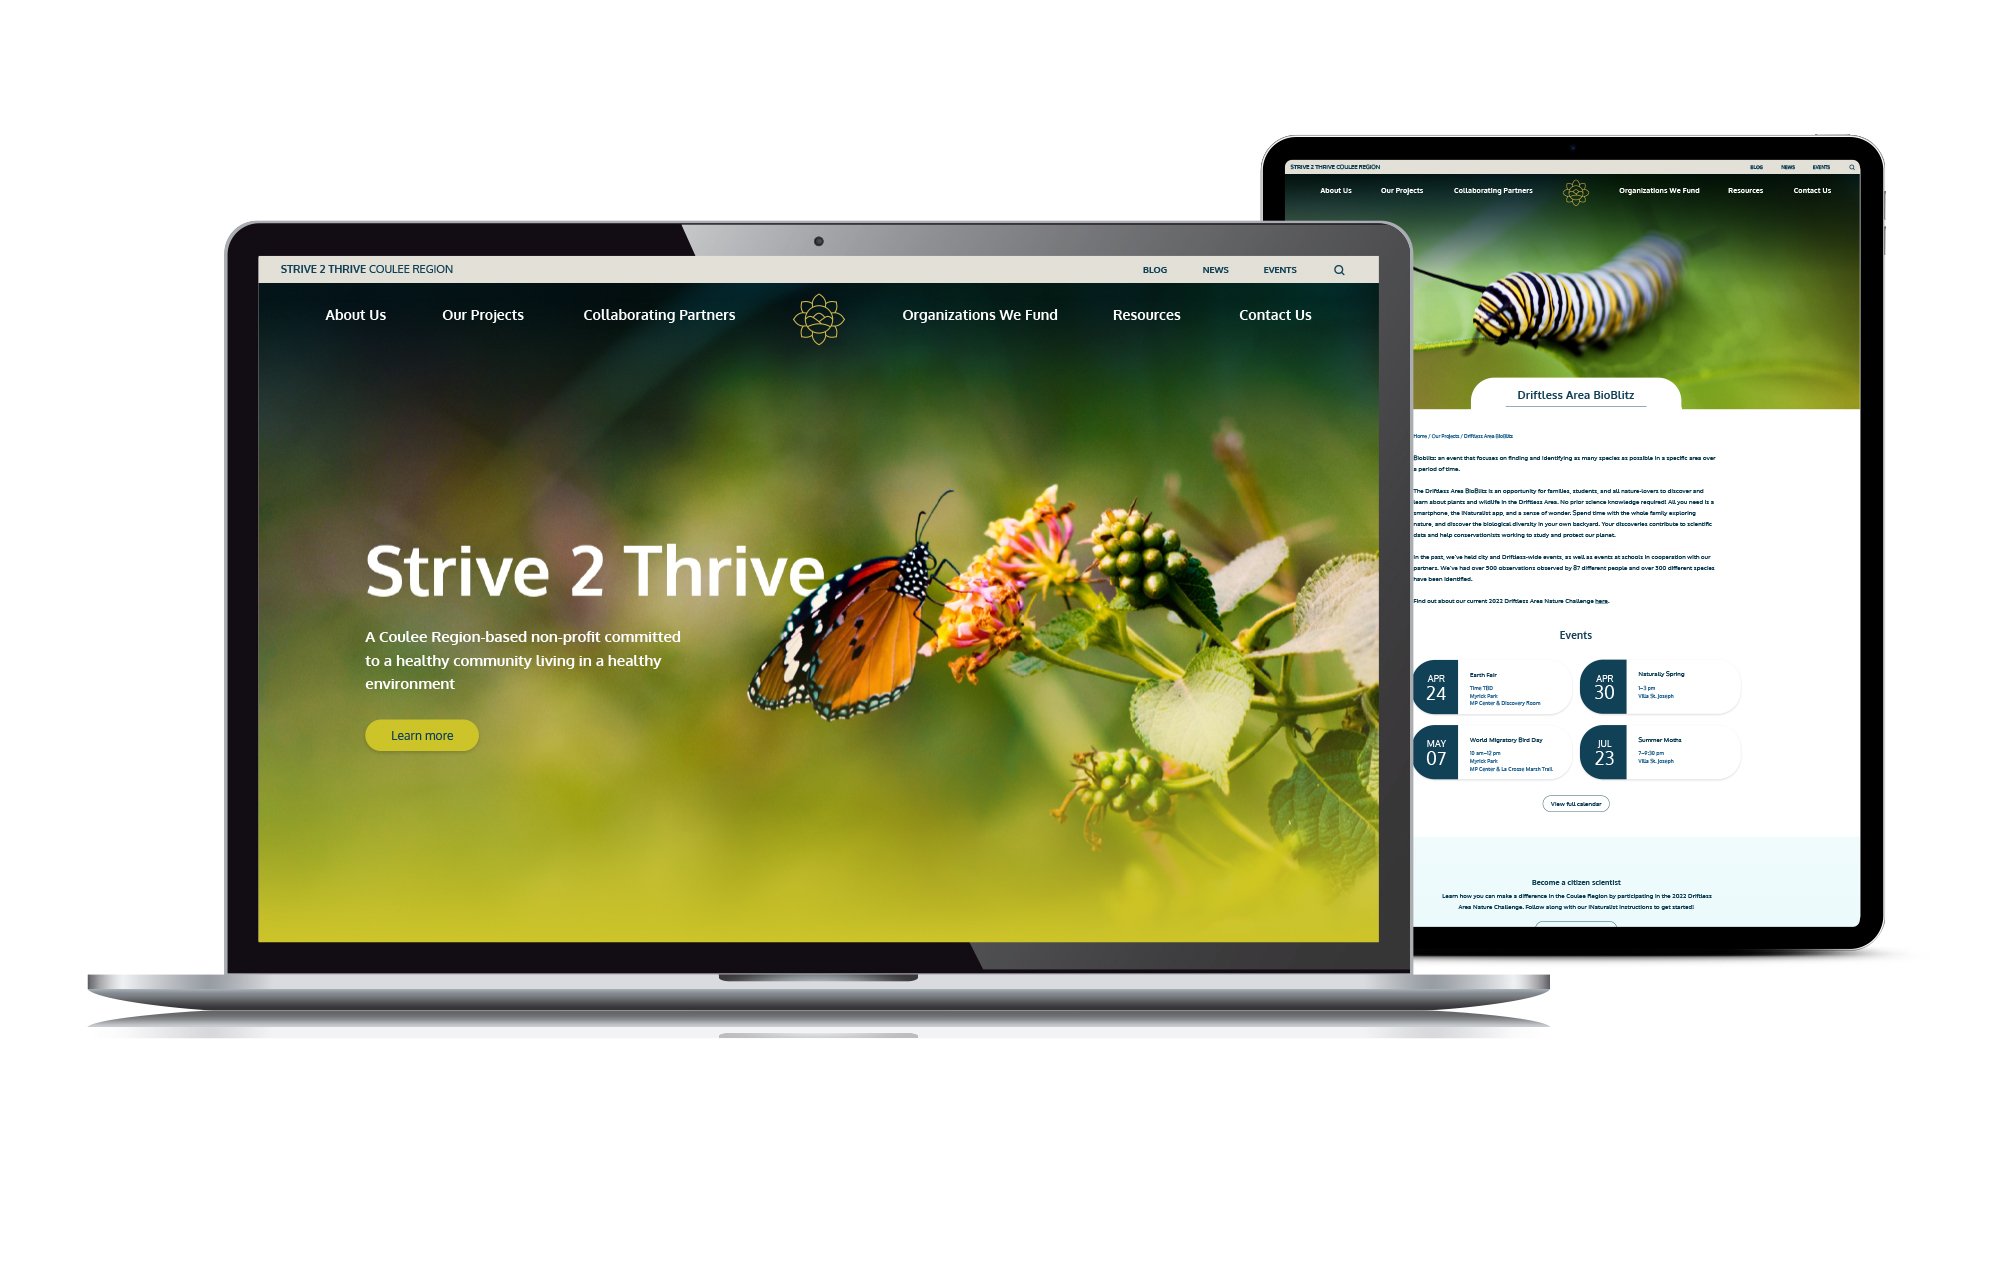 Pages of the Strive 2 Thrive website created by Vendi Advertising displayed on laptop and tablet screens